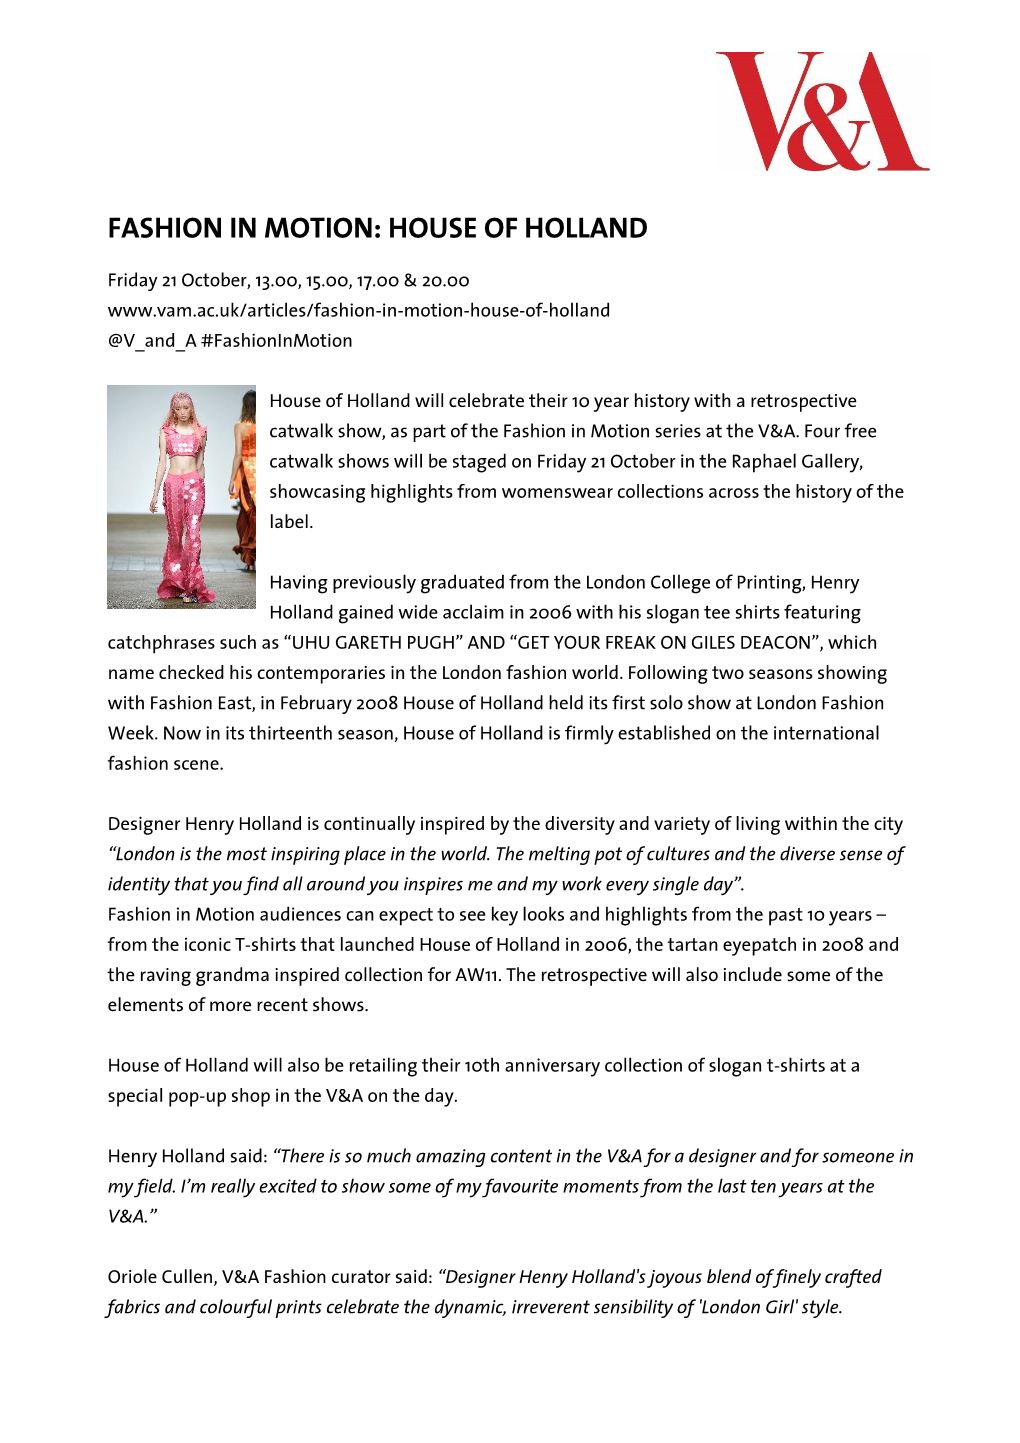 Fashion in Motion: House of Holland